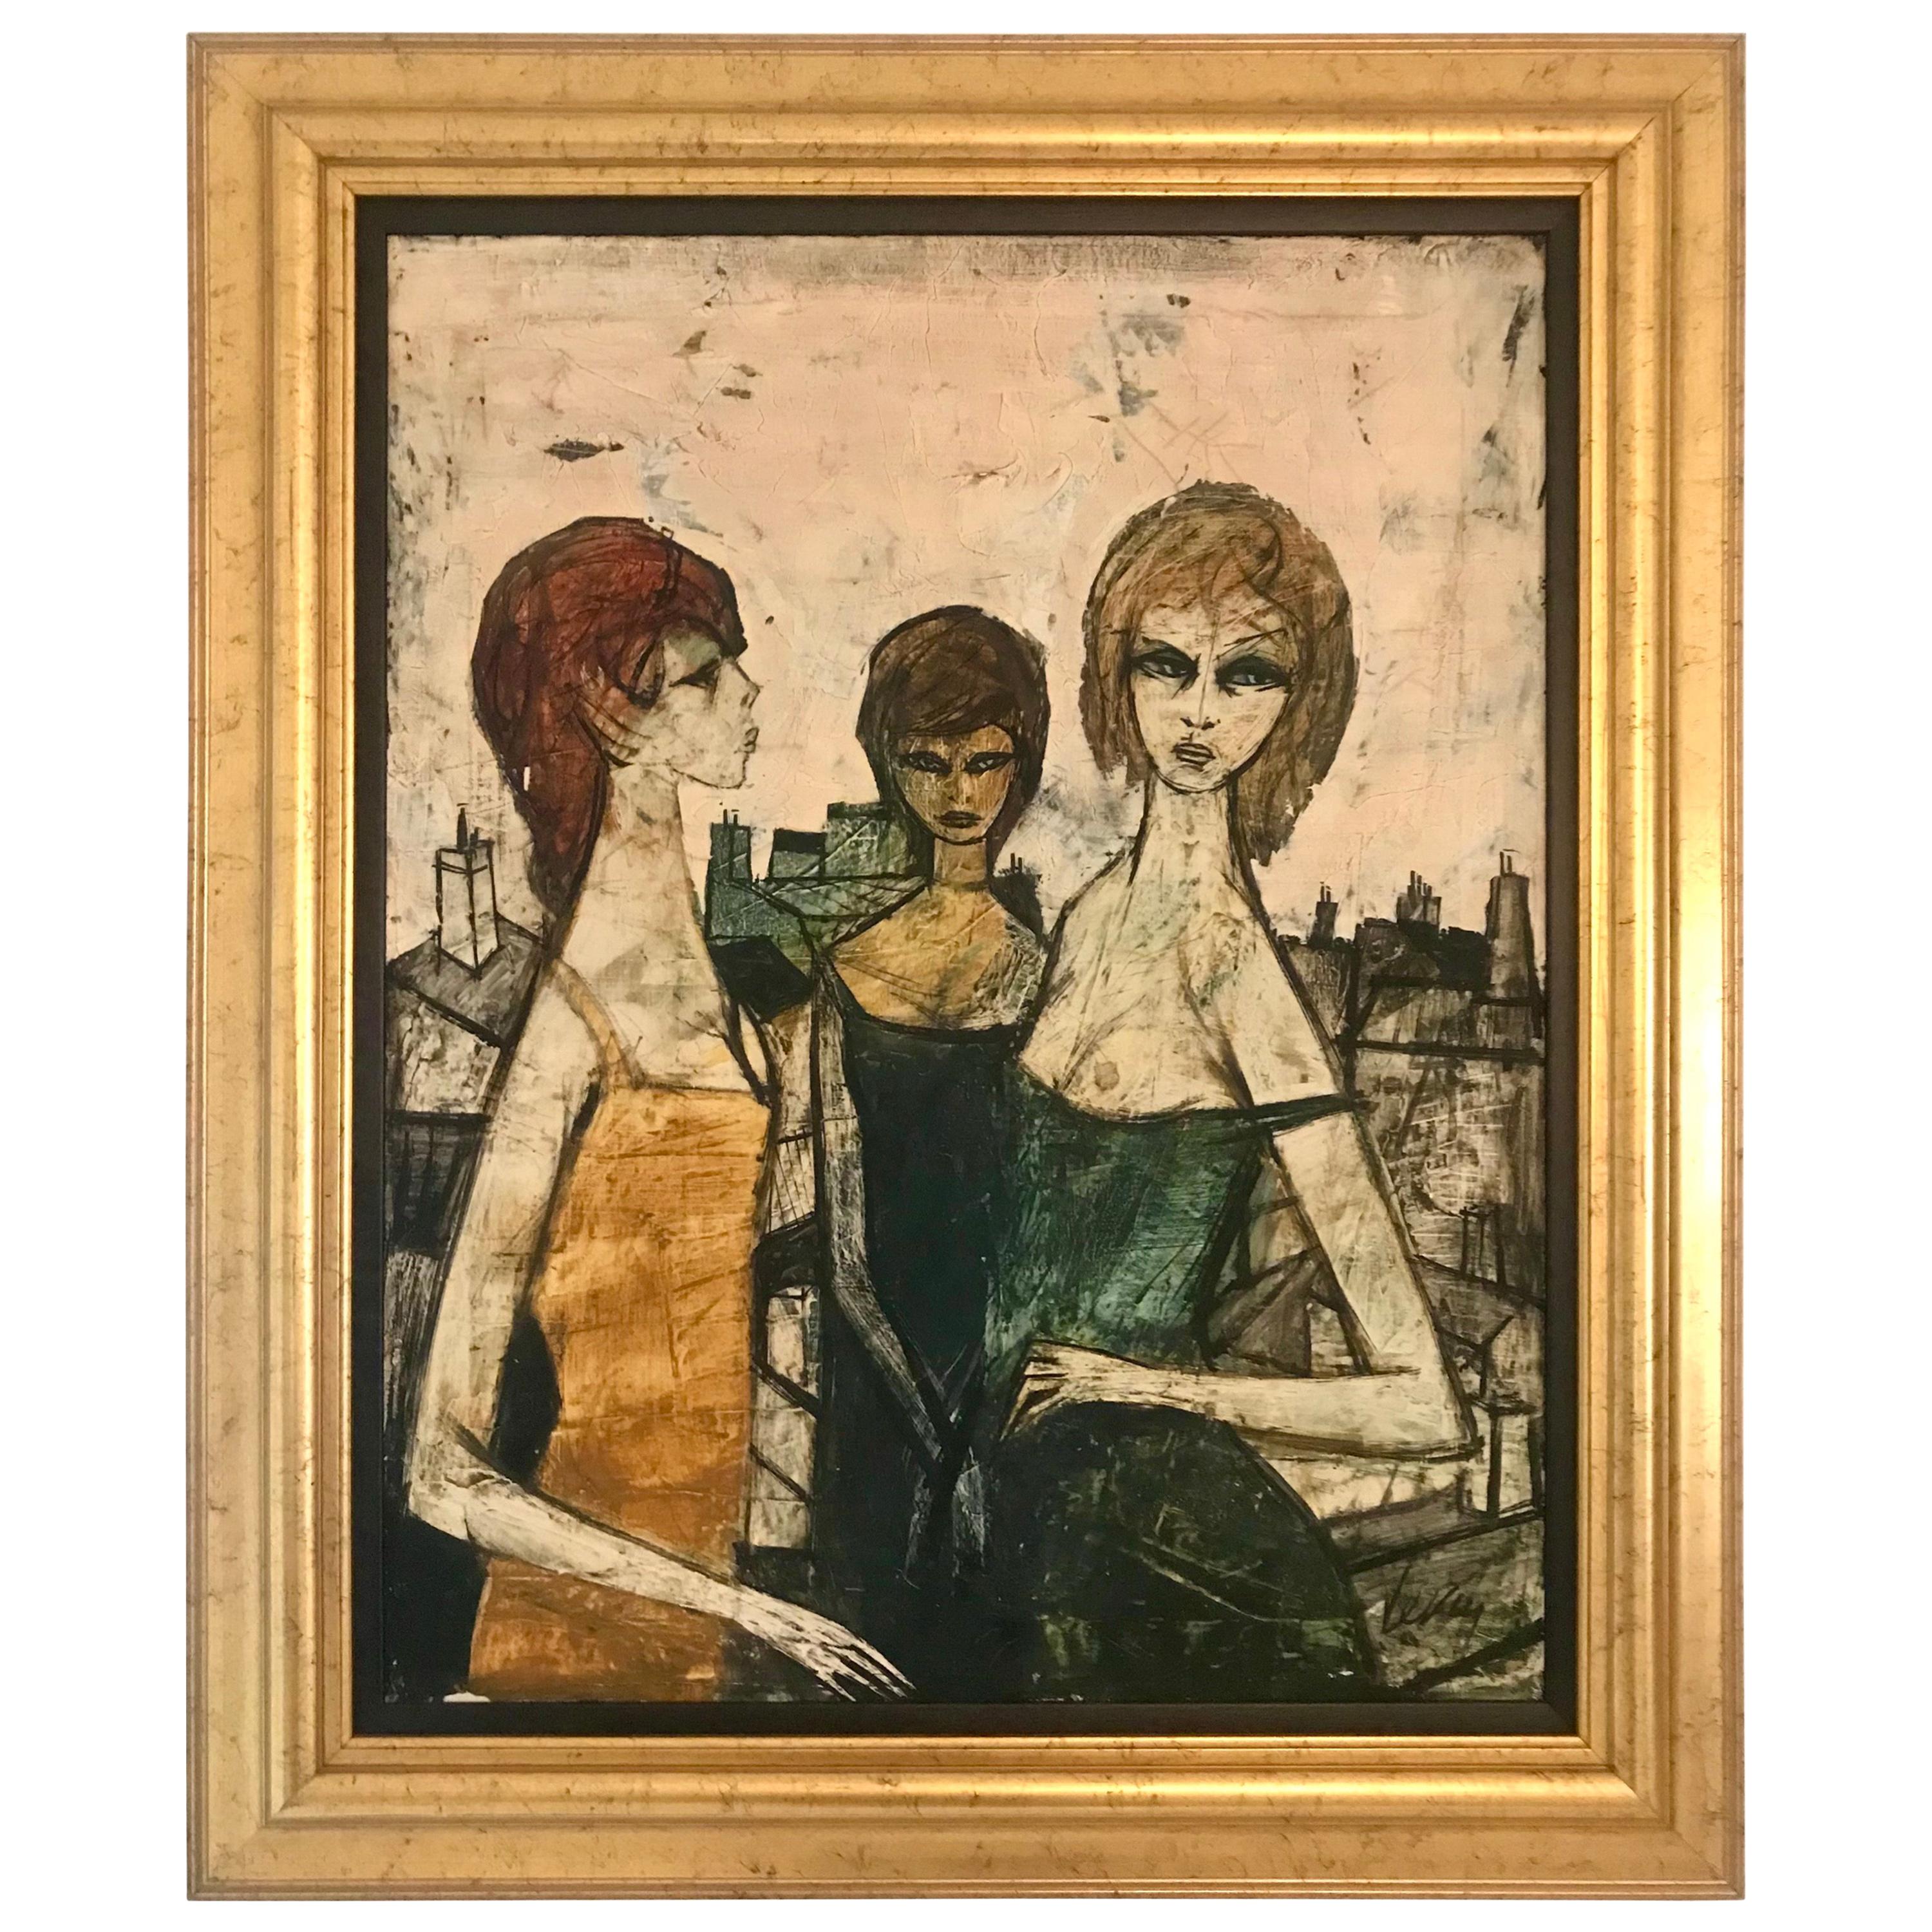 Original Oil on Canvas Painting by Charles Levier of Les Filles, circa 1950s